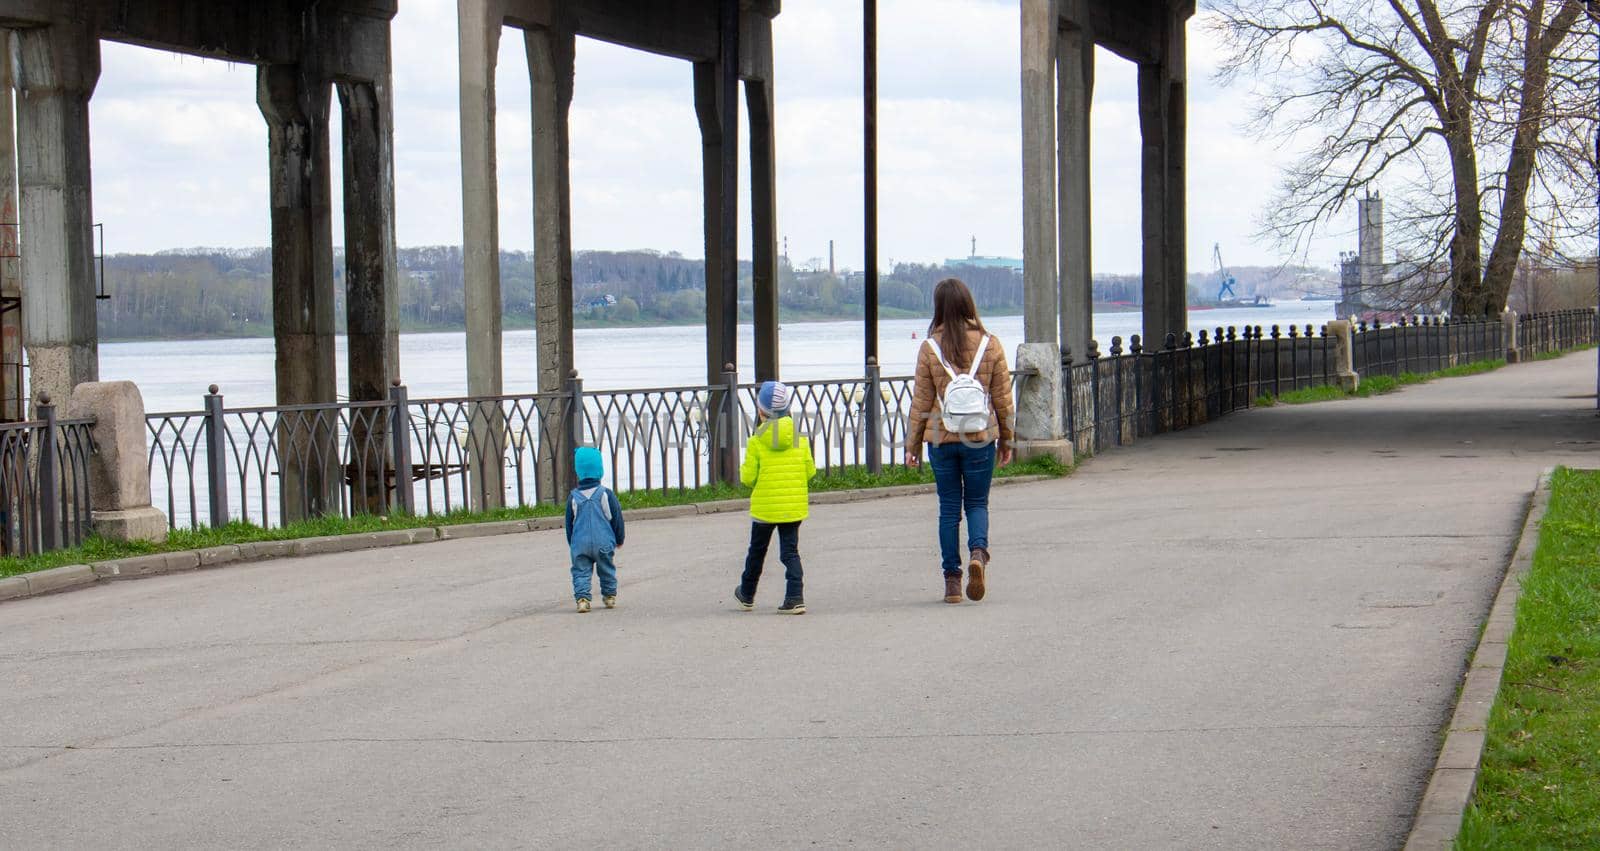 A mother and two small children walk along the embankment on a clear spring day by lapushka62